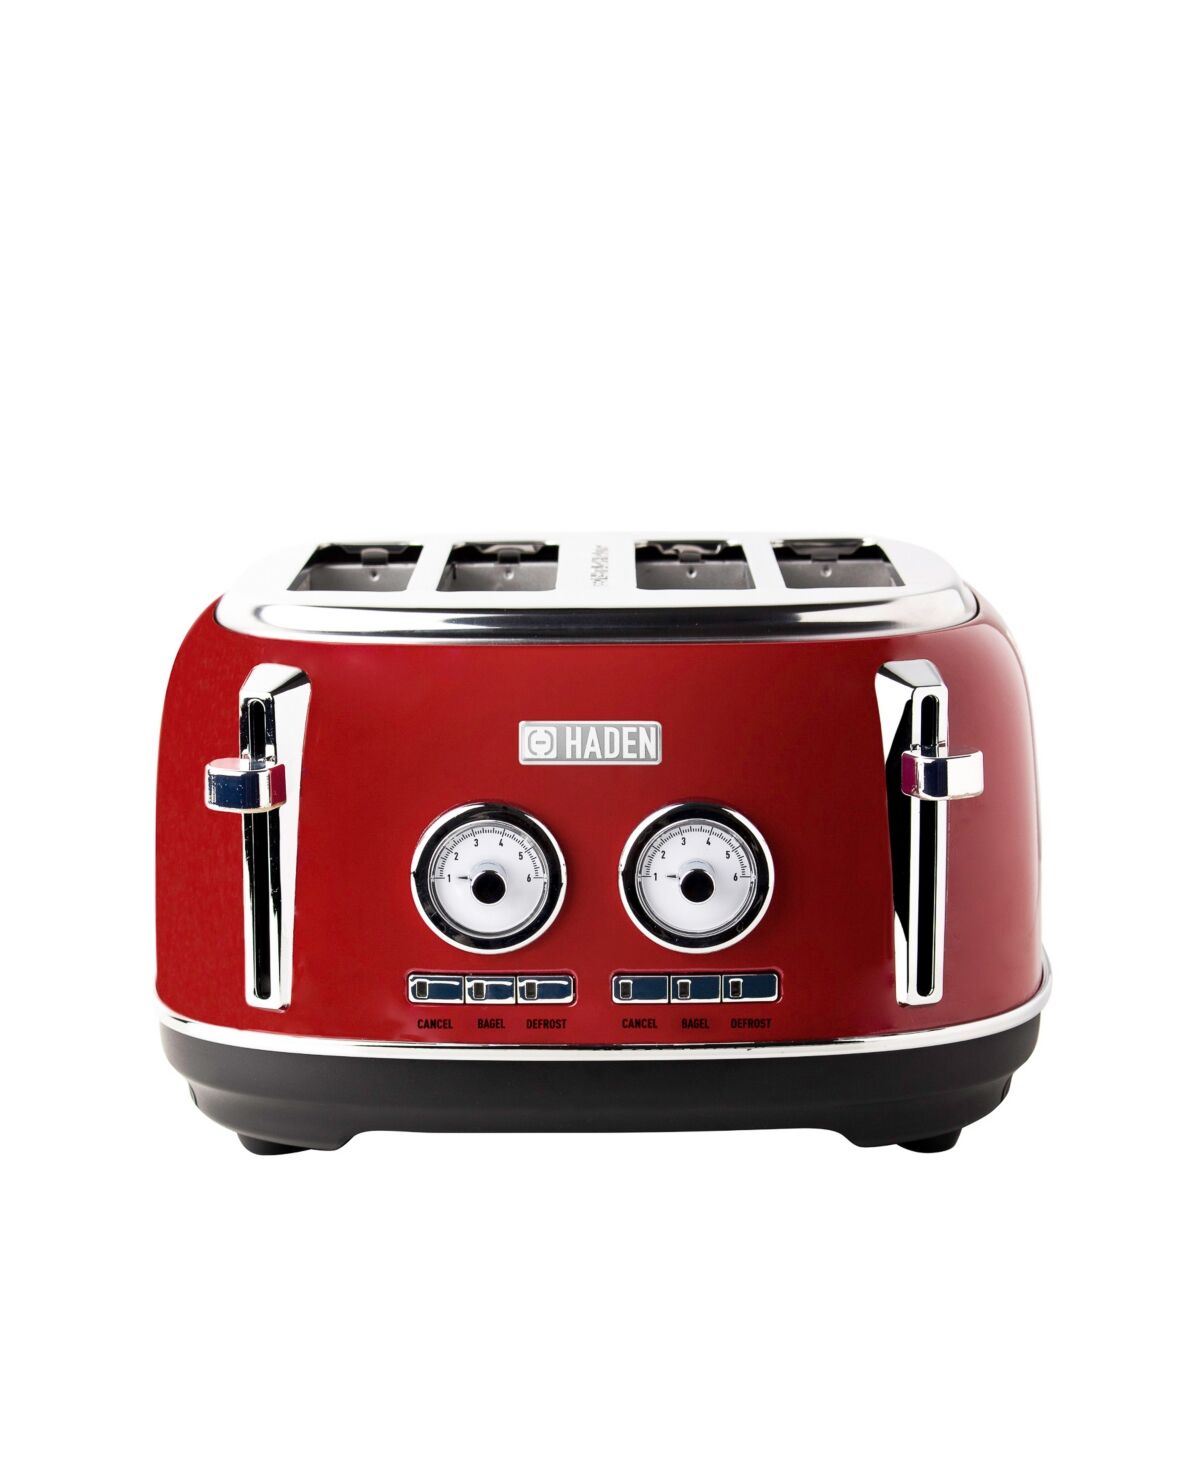 Haden Dorset 4-Slice Toaster with Browning Control, Cancel, Reheat and Defrost Settings - 75040 - Red